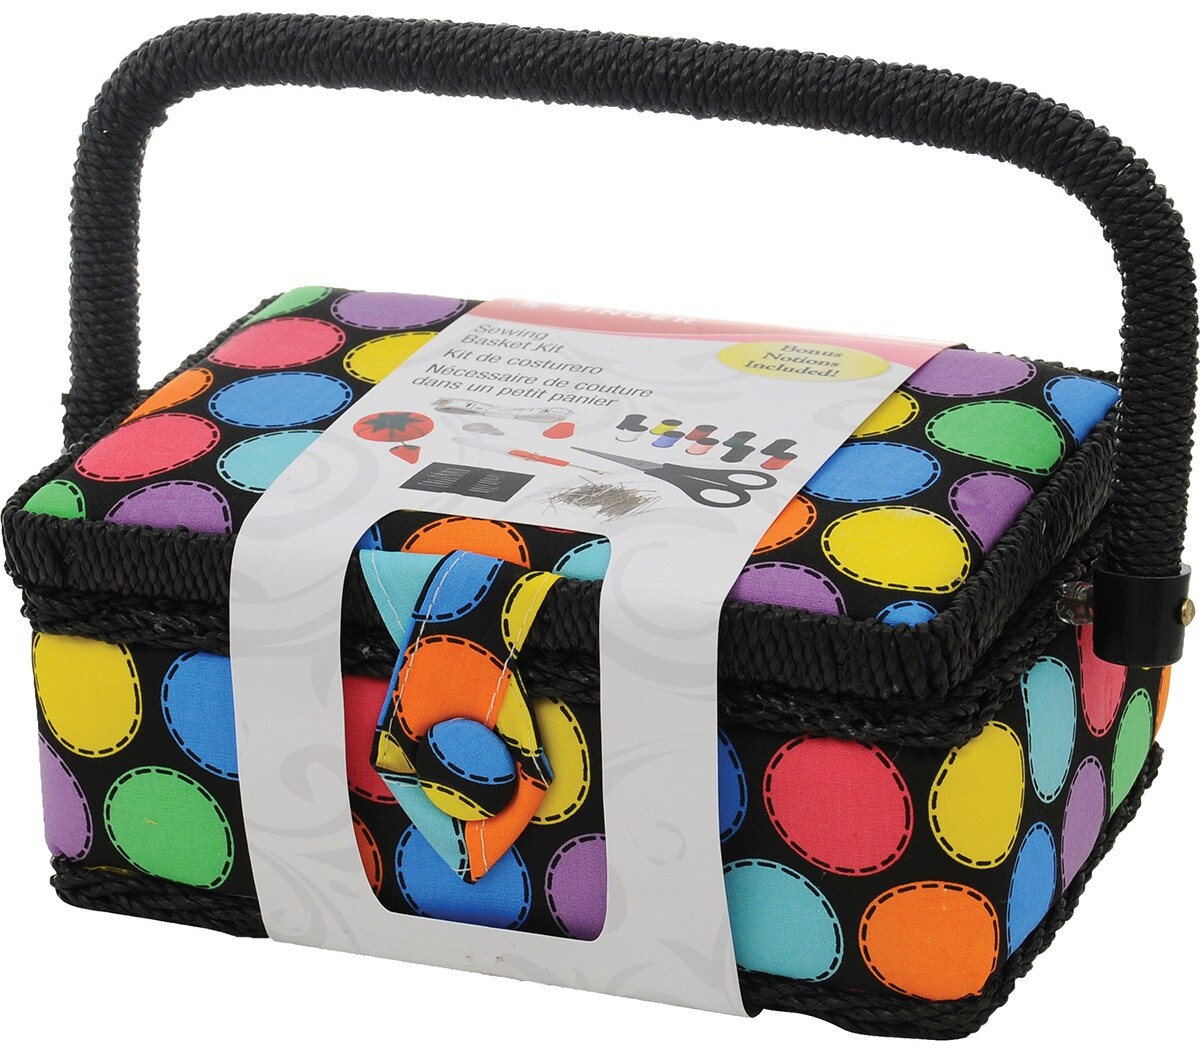 Multipack of 3 - Singer Small Sewing Basket Kit 126pcs-Multi Bright Dots